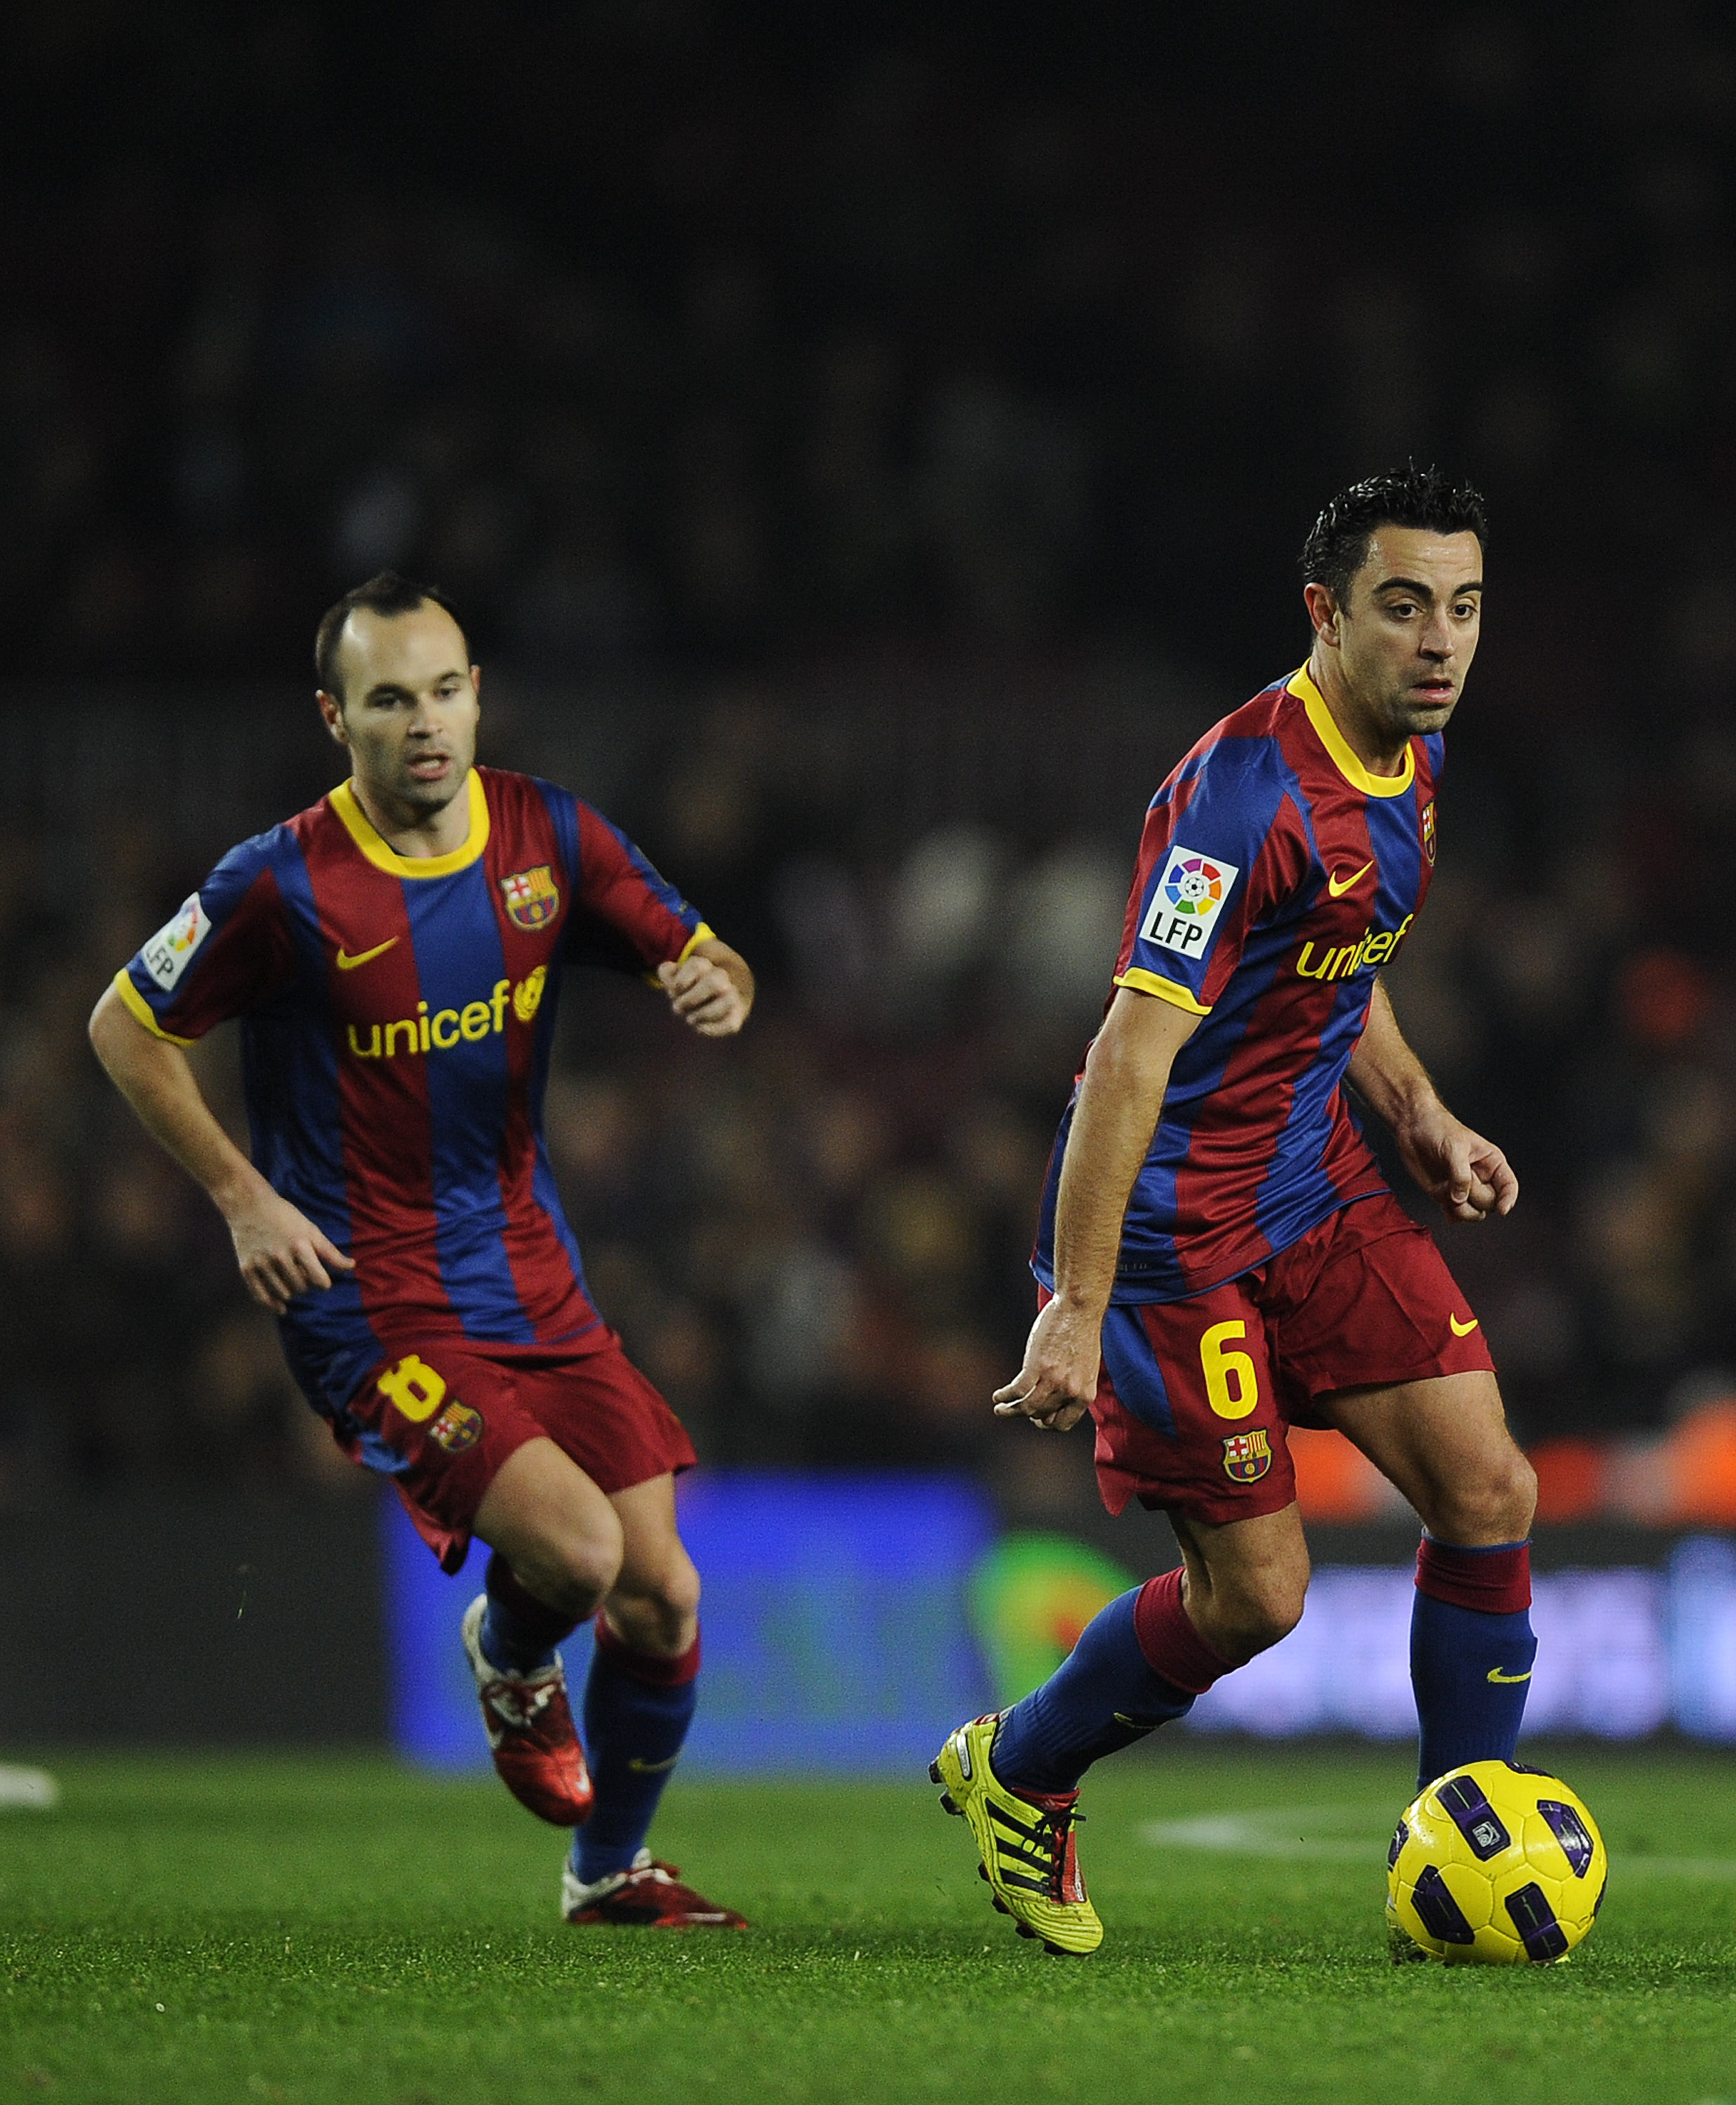 BARCELONA, SPAIN - JANUARY 12:  Xavi Hernandez of FC Barcelona (R) and his teammate Andres Iniesta in action during the Copa del Rey quarter final first leg match between FC Barcelona and Betis at Camp Nou on January 12, 2011 in Barcelona, Spain. Barcelon